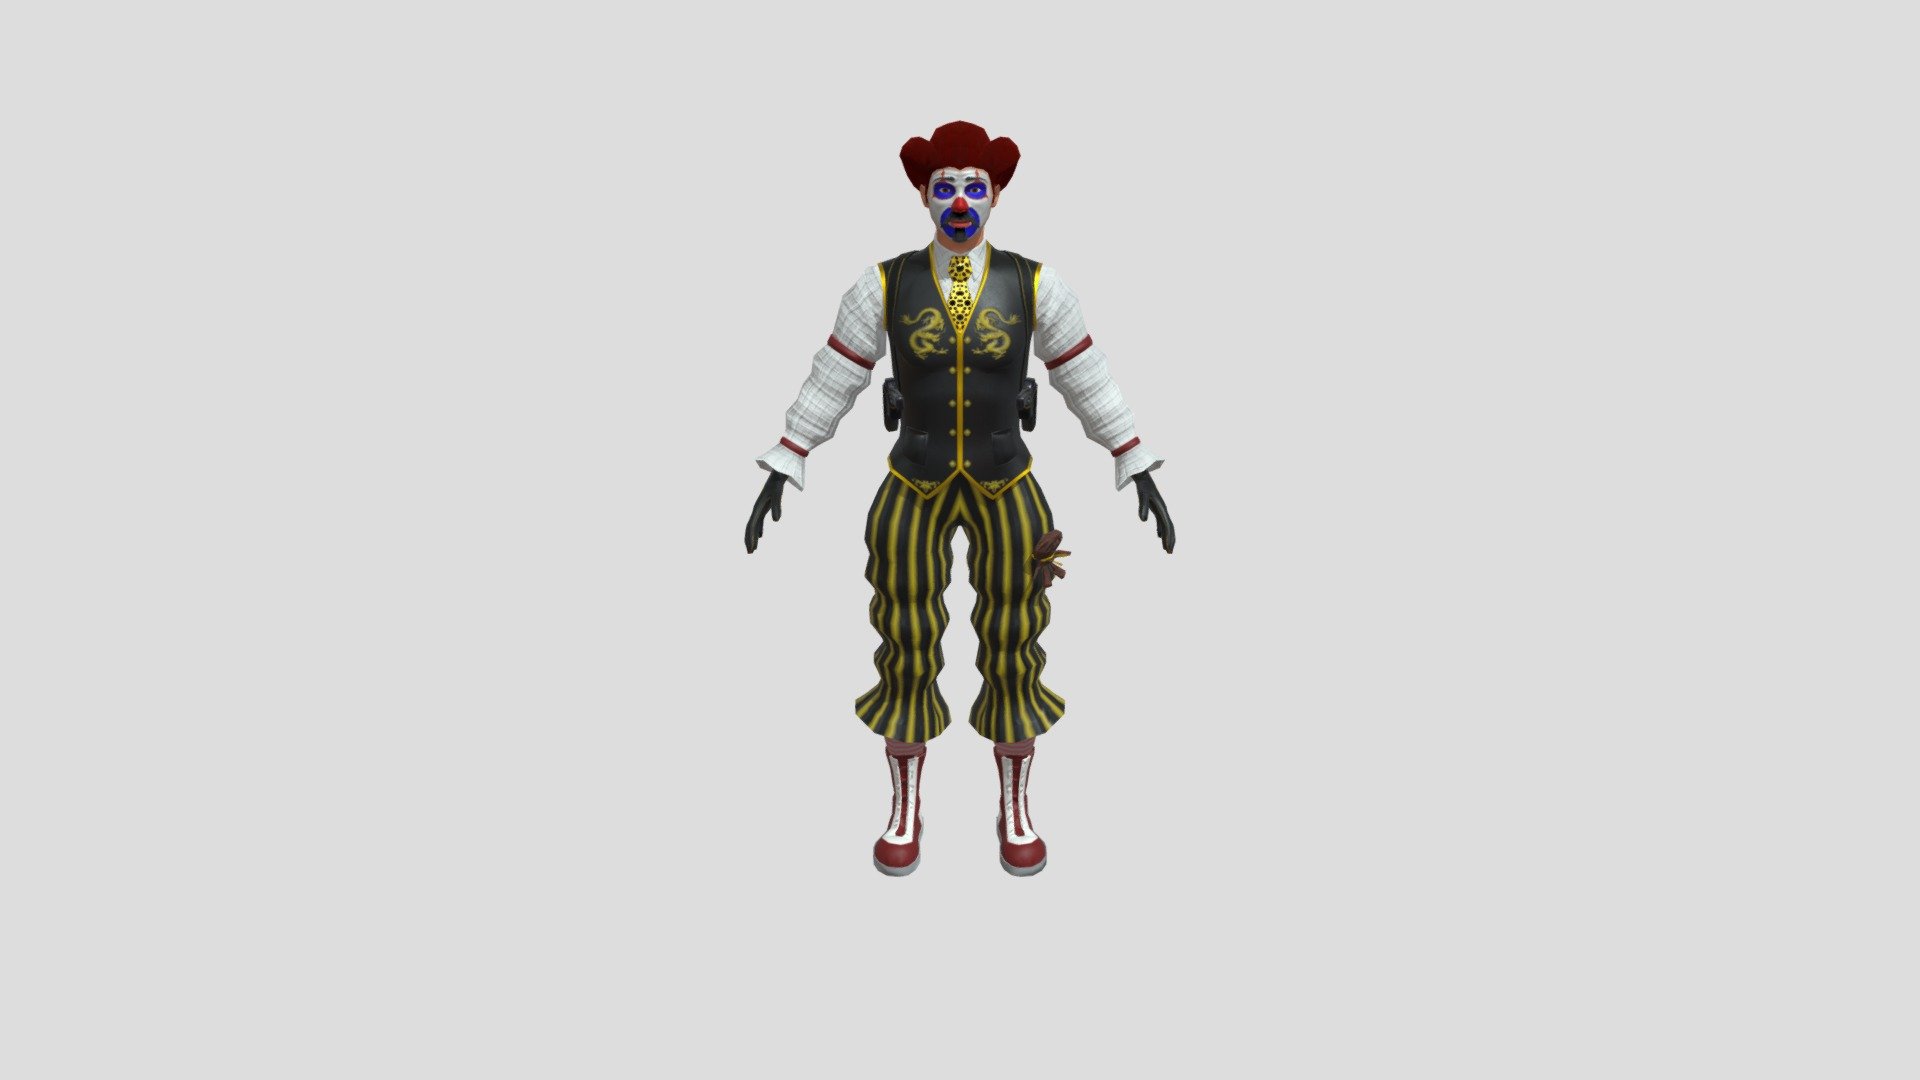 The low poly model of the Clown Warrior consists of 9,668 triangles. 4K PBR textures are packaged in a JLB file. Basic rig is available. The model is equipped with dummies of two pistols in underarm holsters and a Voodoo doll 3d model